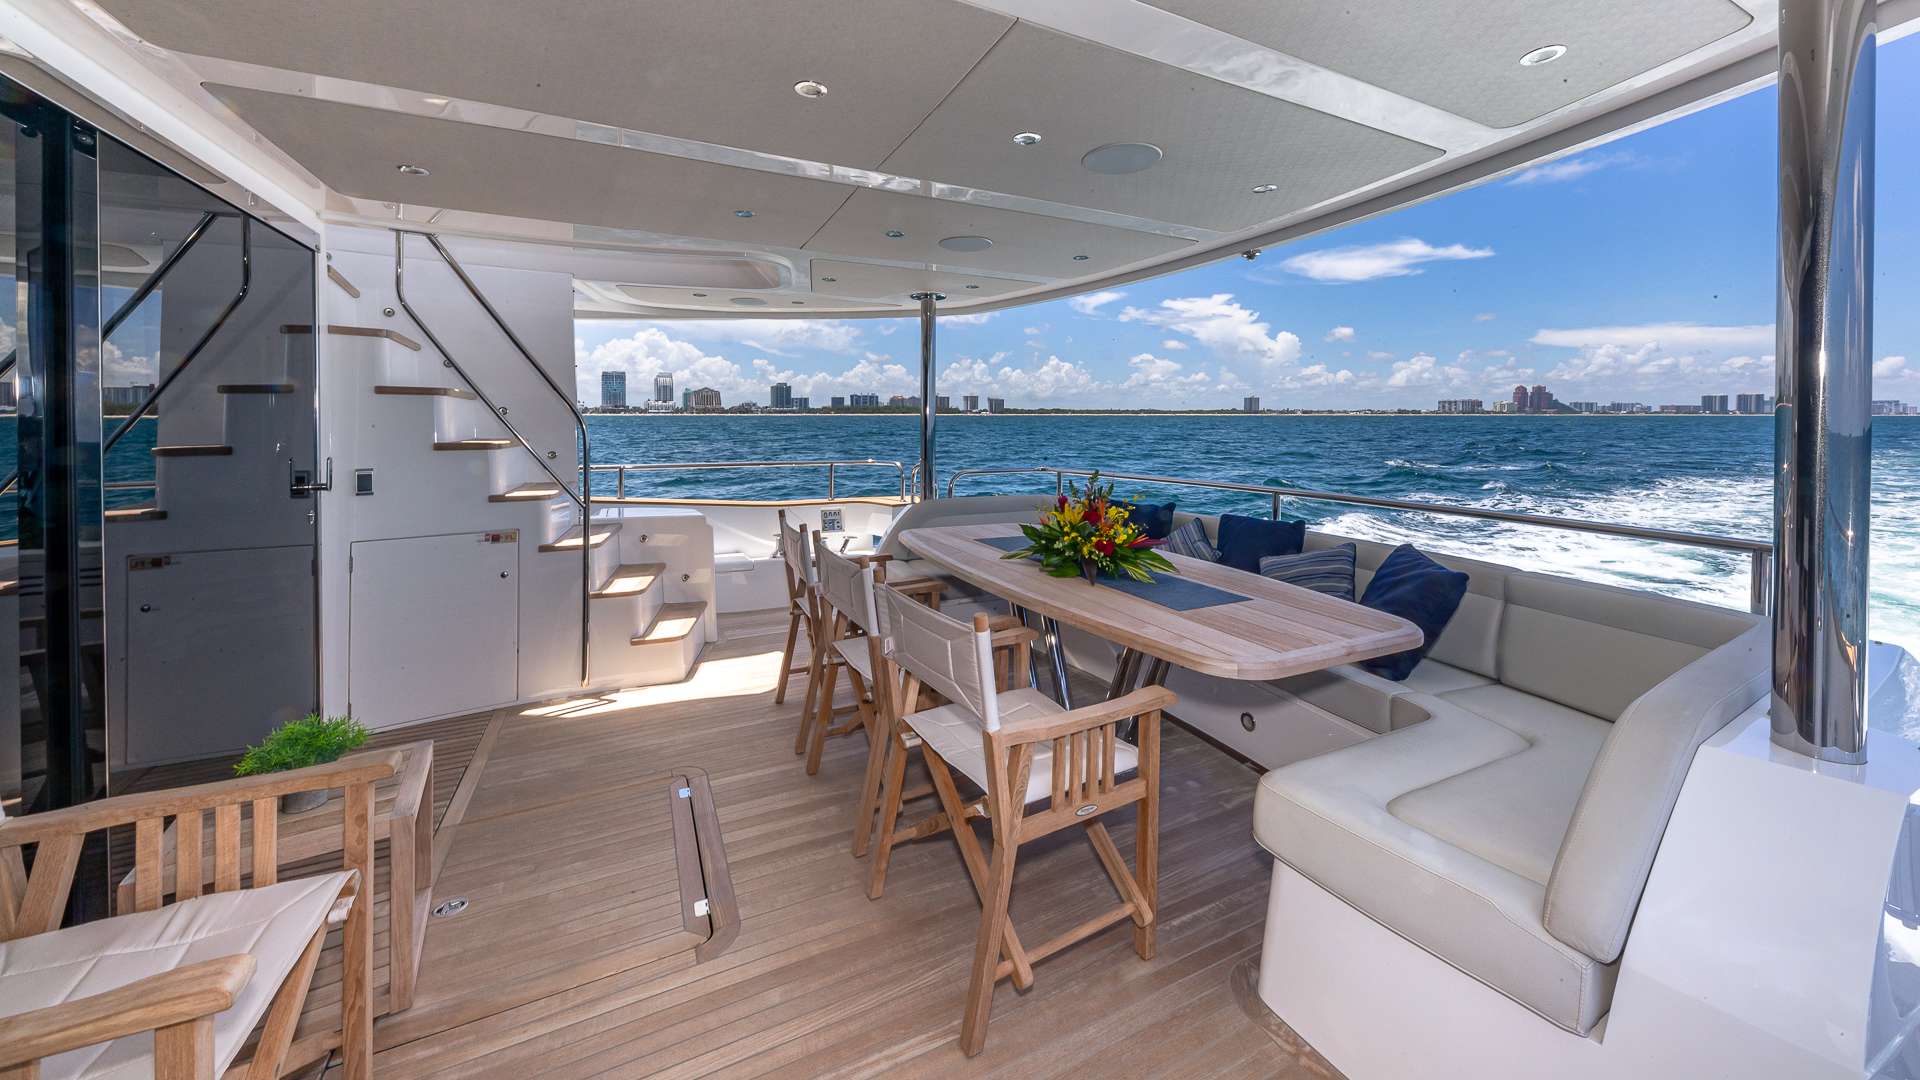 MIRRACLE Yacht Charter - Aft deck